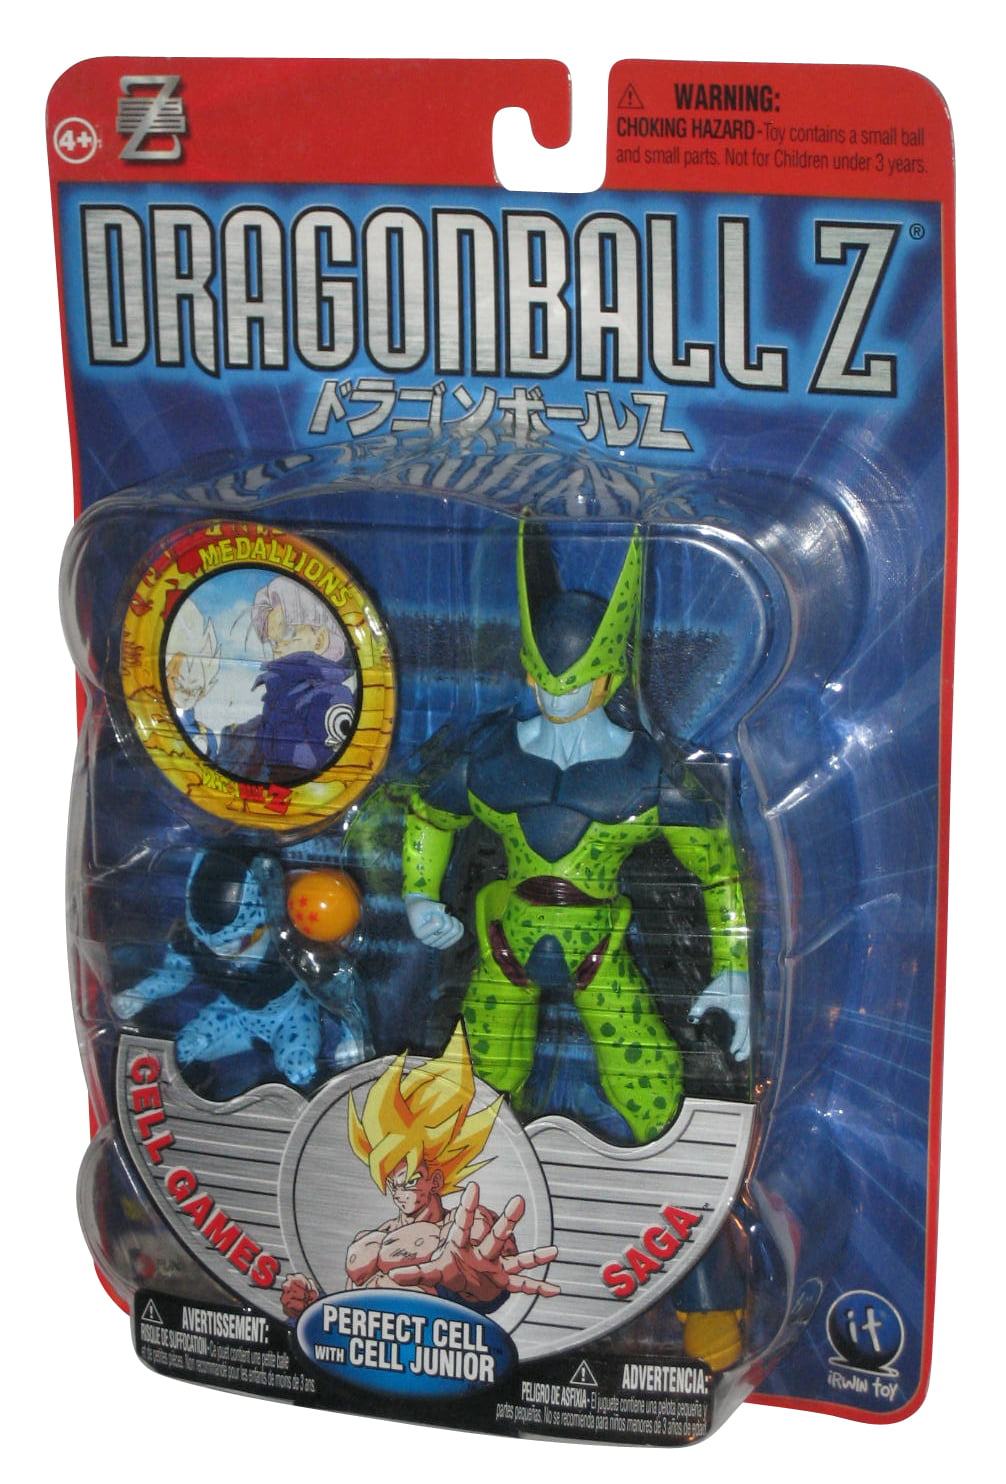 Dragon Ball Dragonball Z Perfect Cell Action Figure Collectible Toy New in Box 